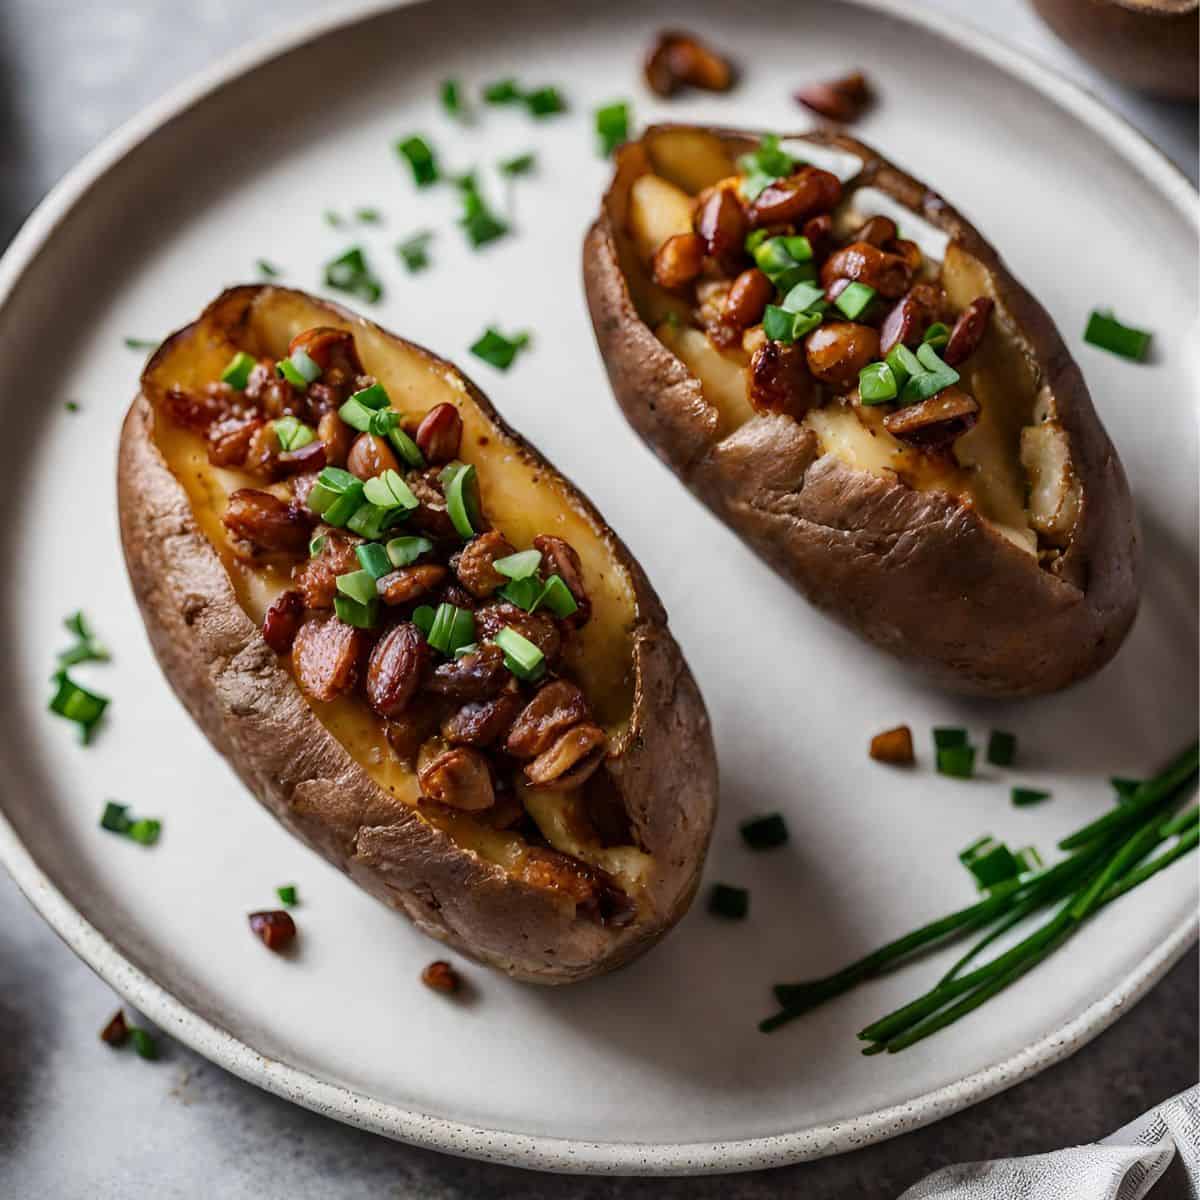 Air fryer baked potatoes on plate, stuffed with candied pecan bacon and chives.